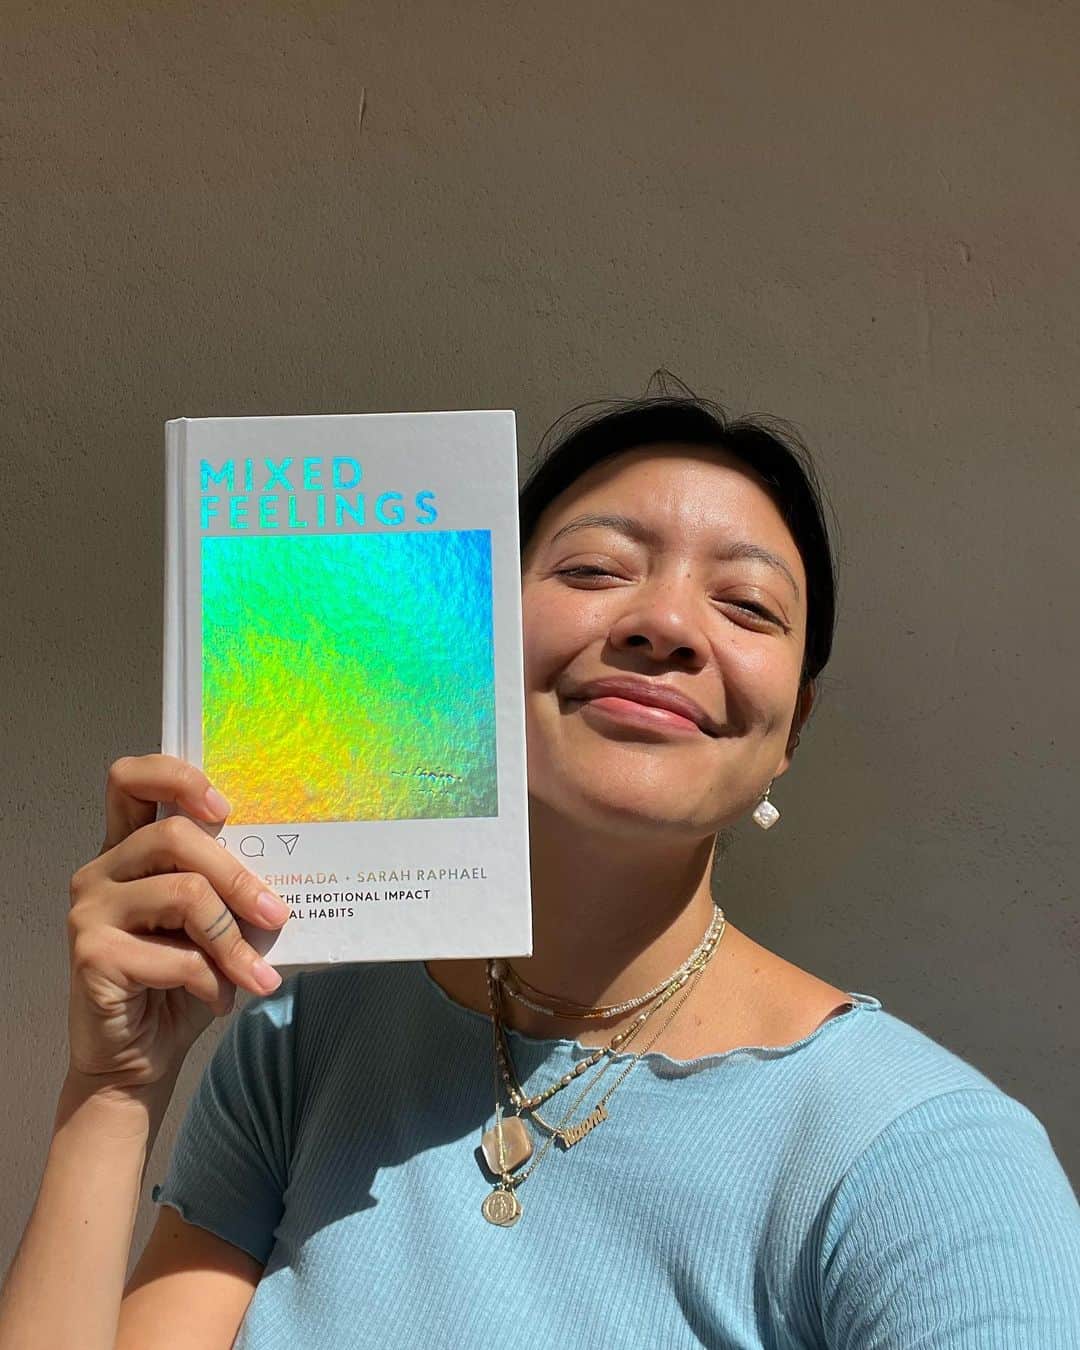 ナオミ・シマダのインスタグラム：「Today marks 4 whole years since @mixedfeelingsbook came out into the world and wow what a trip it is to look back as so much has happened since then, both on a personal and collective level. This book came out a mere 6 months before the pandemic took hold of the world and changed our lives forever. Many of our existences consequentially were forced even more online than ever exacerbating the many already complicated relationships many of us had with social media. I think at the time of writing it, I was slightly nervous about how this book would age as everyone kept calling the subject matter ‘so timely’ but I feel like conversations about the emotional impact of social media have become even more pertinent or even extremely vital as we continue to try and make sense of this ever turbulent world and who we are in it while also existing in this space that has only become more algorithmically lead by capital. This booked helped me see the correlation and recognition that whats playing out in the world is reflecting that what’s going on in our psyches’s.   On a personal level this book was huge deal for me as while shopping this book around I was suffering with so much imposter syndrome around my writing, leaving me drowning in a pool of depression I struggled to get out of. Seeing it through and finishing it helped me to exorcise so many of my own shadows that made my relationship to social media complicated in the first place. It helped me believe in my voice and see myself from a whole new much kinder and generative perspective and for the most part helped me create a new much healthier relationship to this space. It was my death and my rebirth. Thank you sweet @sarah_raphael for being my co-pilot/conspirator and taking that wild journey with me! Thank you to our many beautiful collaborators who shared your voices in the book! Thank you @susannah_otter for making it happen! Thank you Nicola Chang for believing in me way before I did! Thank you to everyone who bought it or managed to read it somehow! Your notes and letters were everything! Thank you universe for the lessons that come in all shapes, for continuing to show me the way, humbled + grateful 🩵」